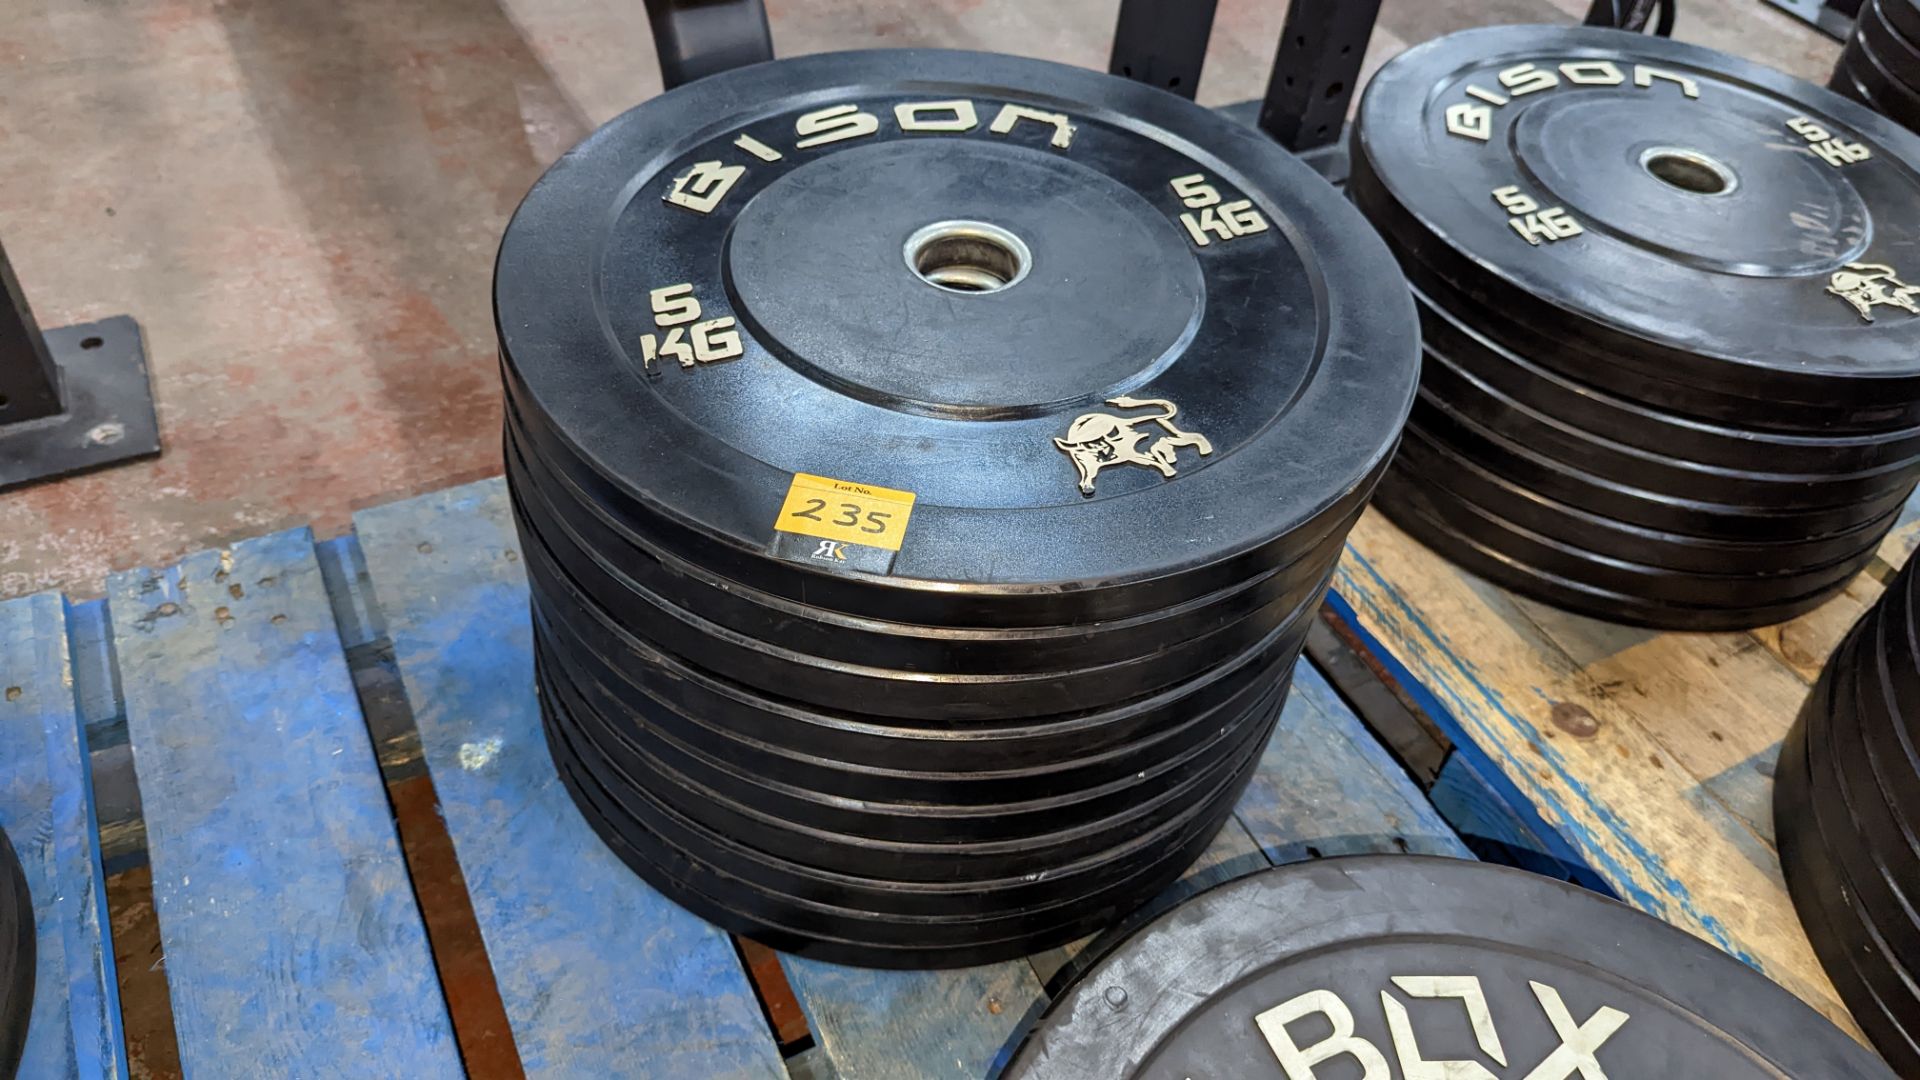 10 off Bison 5kg rubberised Olympic plates